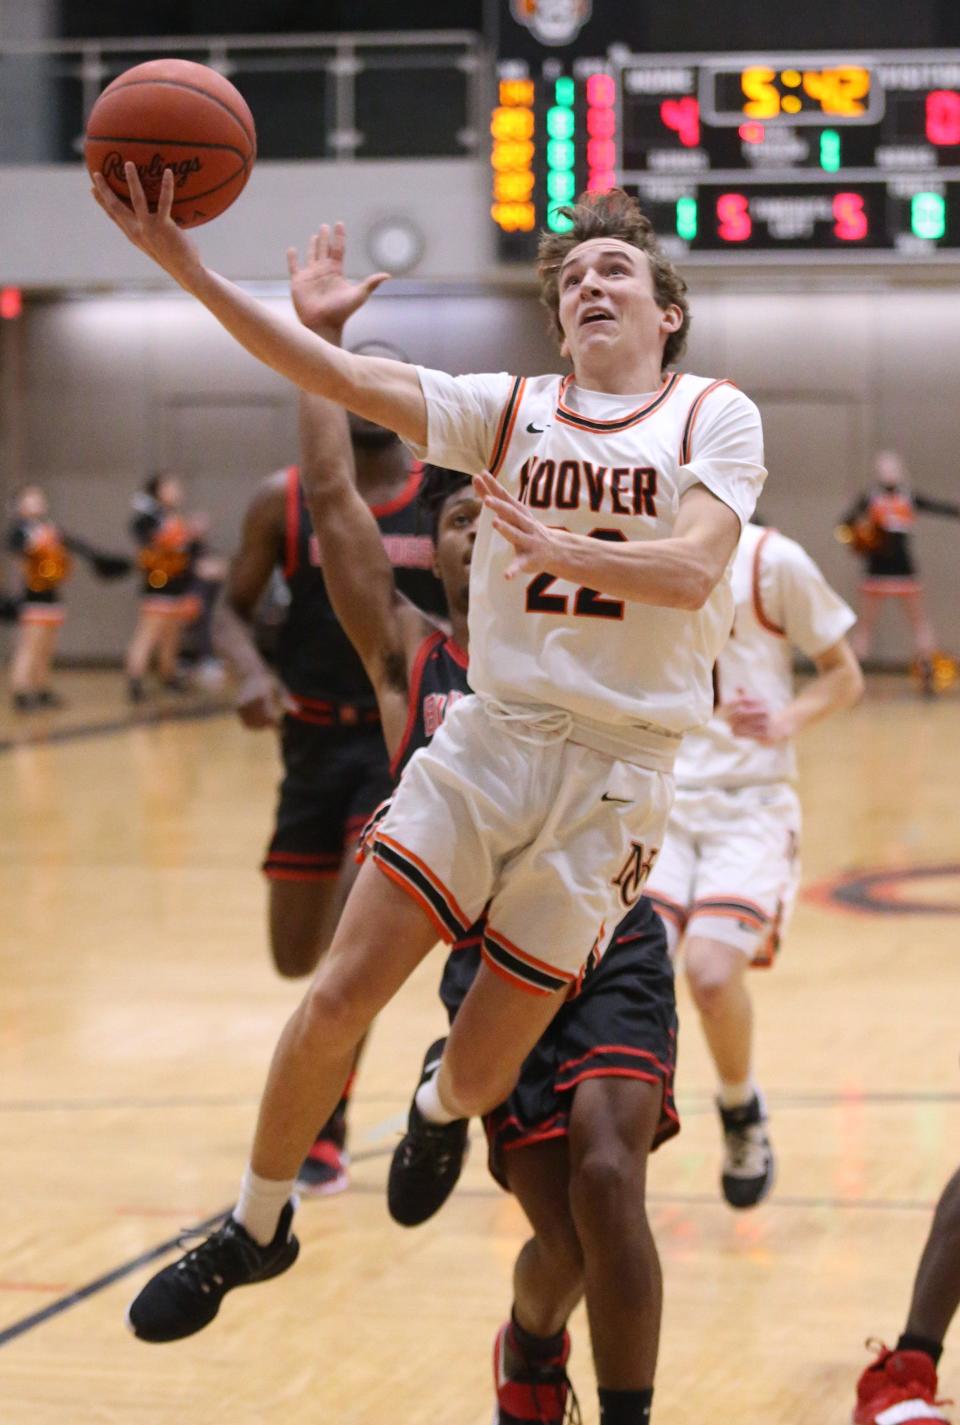 Wes Collins of Hoover flies through the lane on the way to the basket during their game against McKinley at Hoover on Friday, Feb. 12, 2021. 